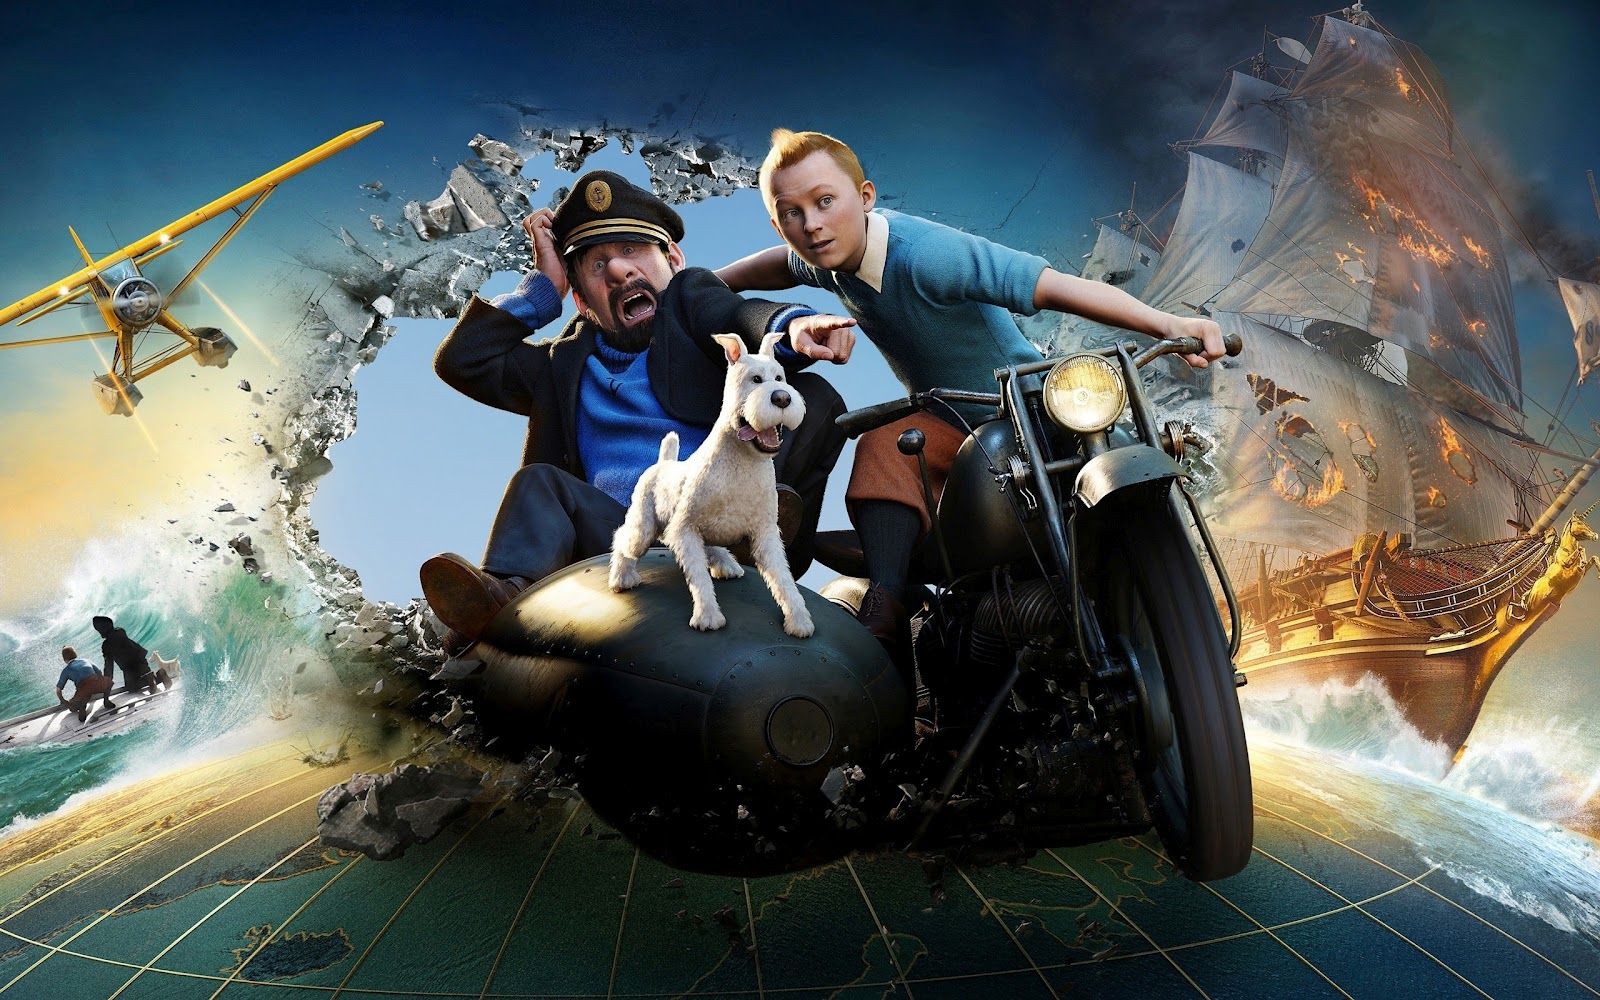 Adventures Of Tintin Posters HD Wallpaper Background